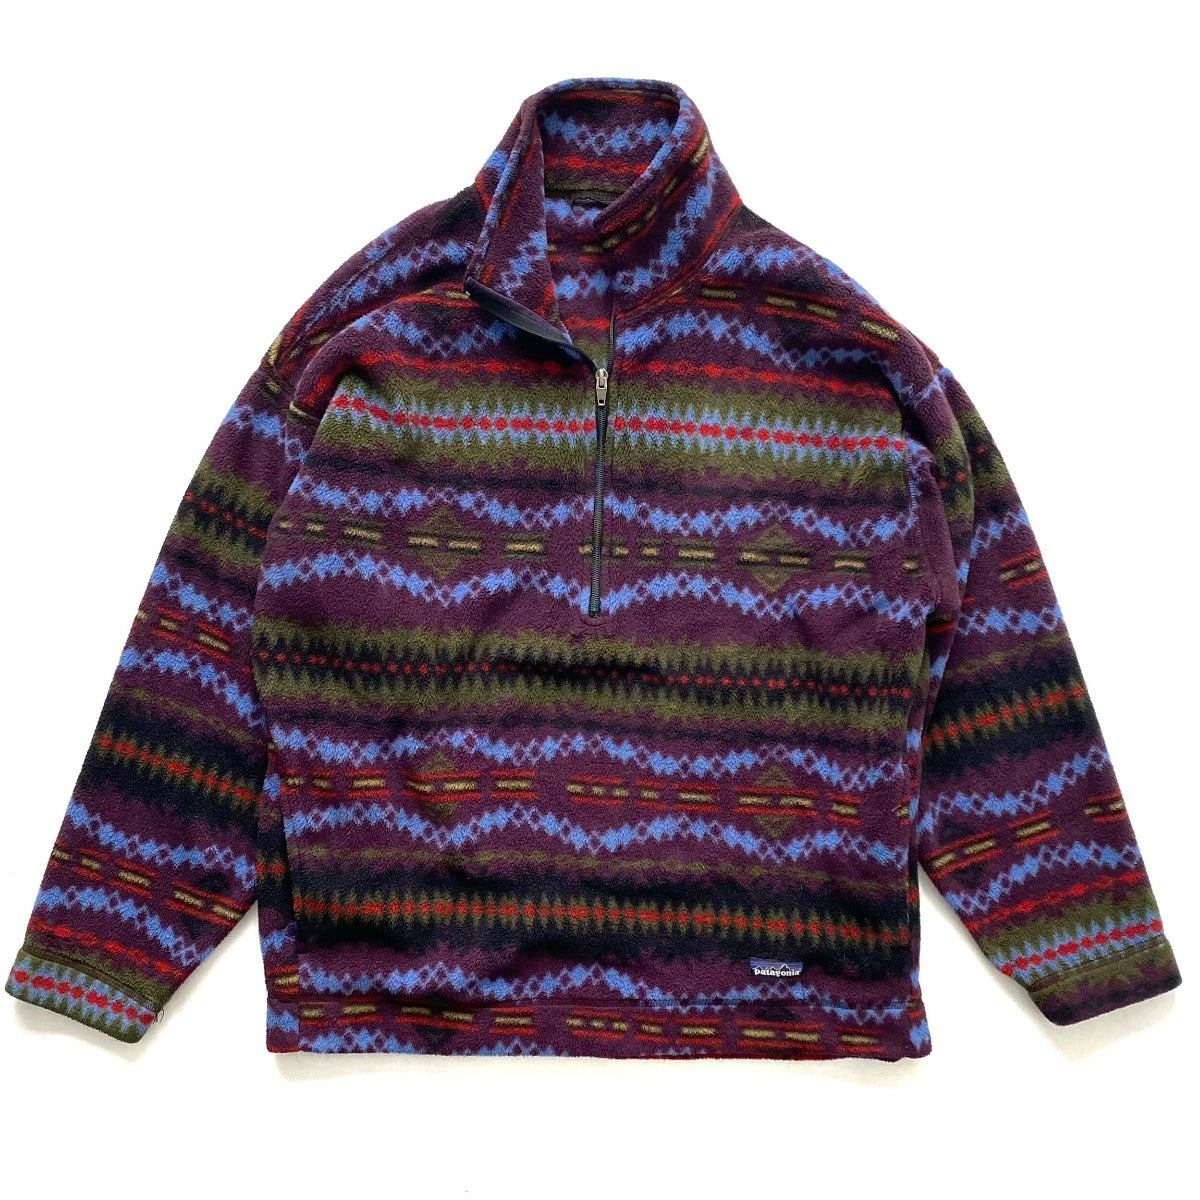 Fall Fleece Pullover Synchilla – Vintage Aztec Thirty-First 1994 The Patagonia